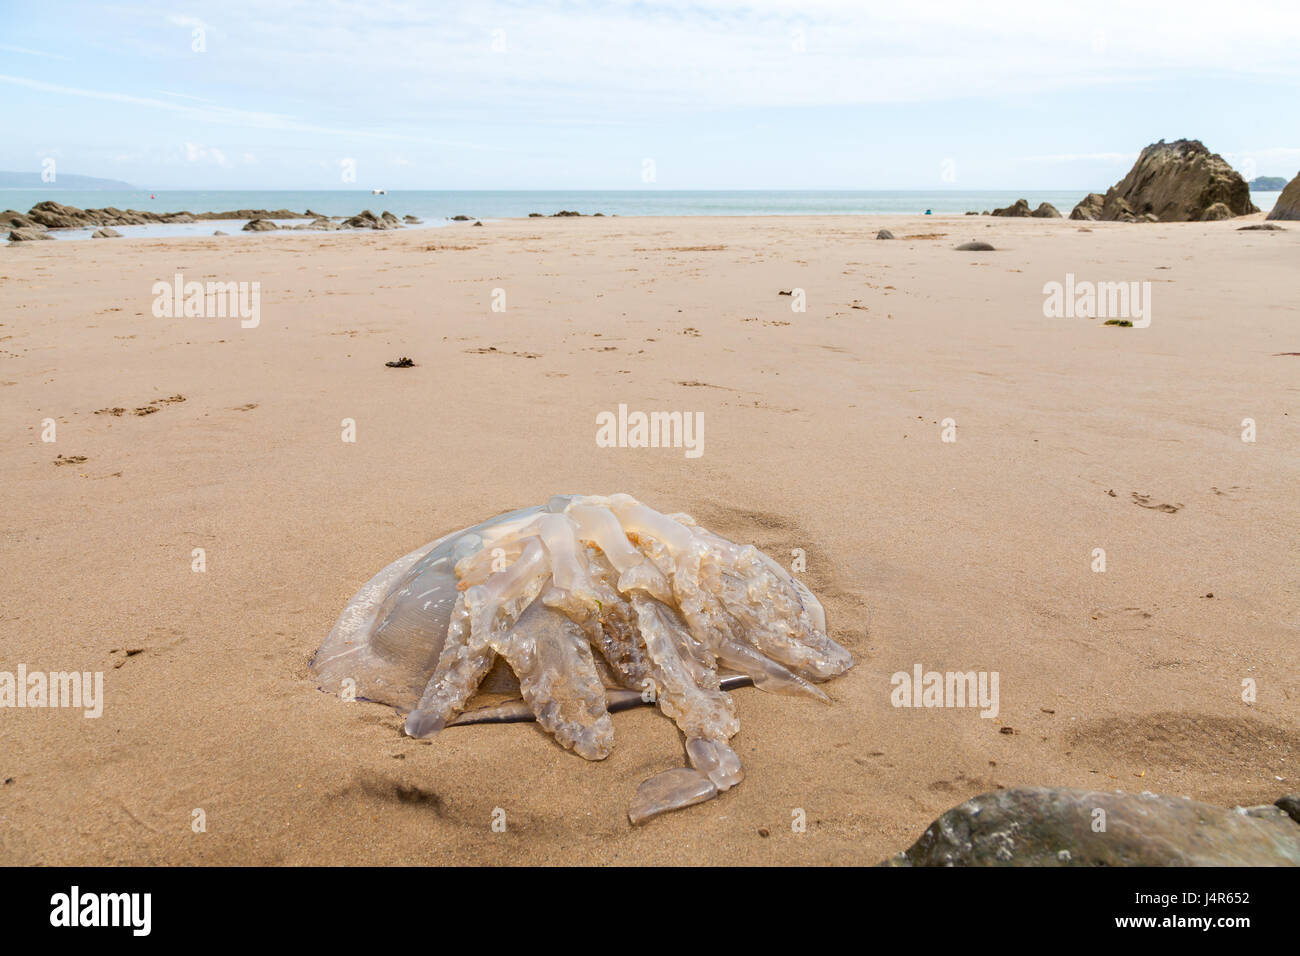 Pembrokeshire, UK. 13th May, 2017. Mass landings of huge barrel jellyfish have been reported washing up on beaches across Pembrokeshire and Ceredigion. These where spotted at Saunderfoot, Pembrokeshire, Wales Credit: Derek Phillips/Alamy Live News Stock Photo